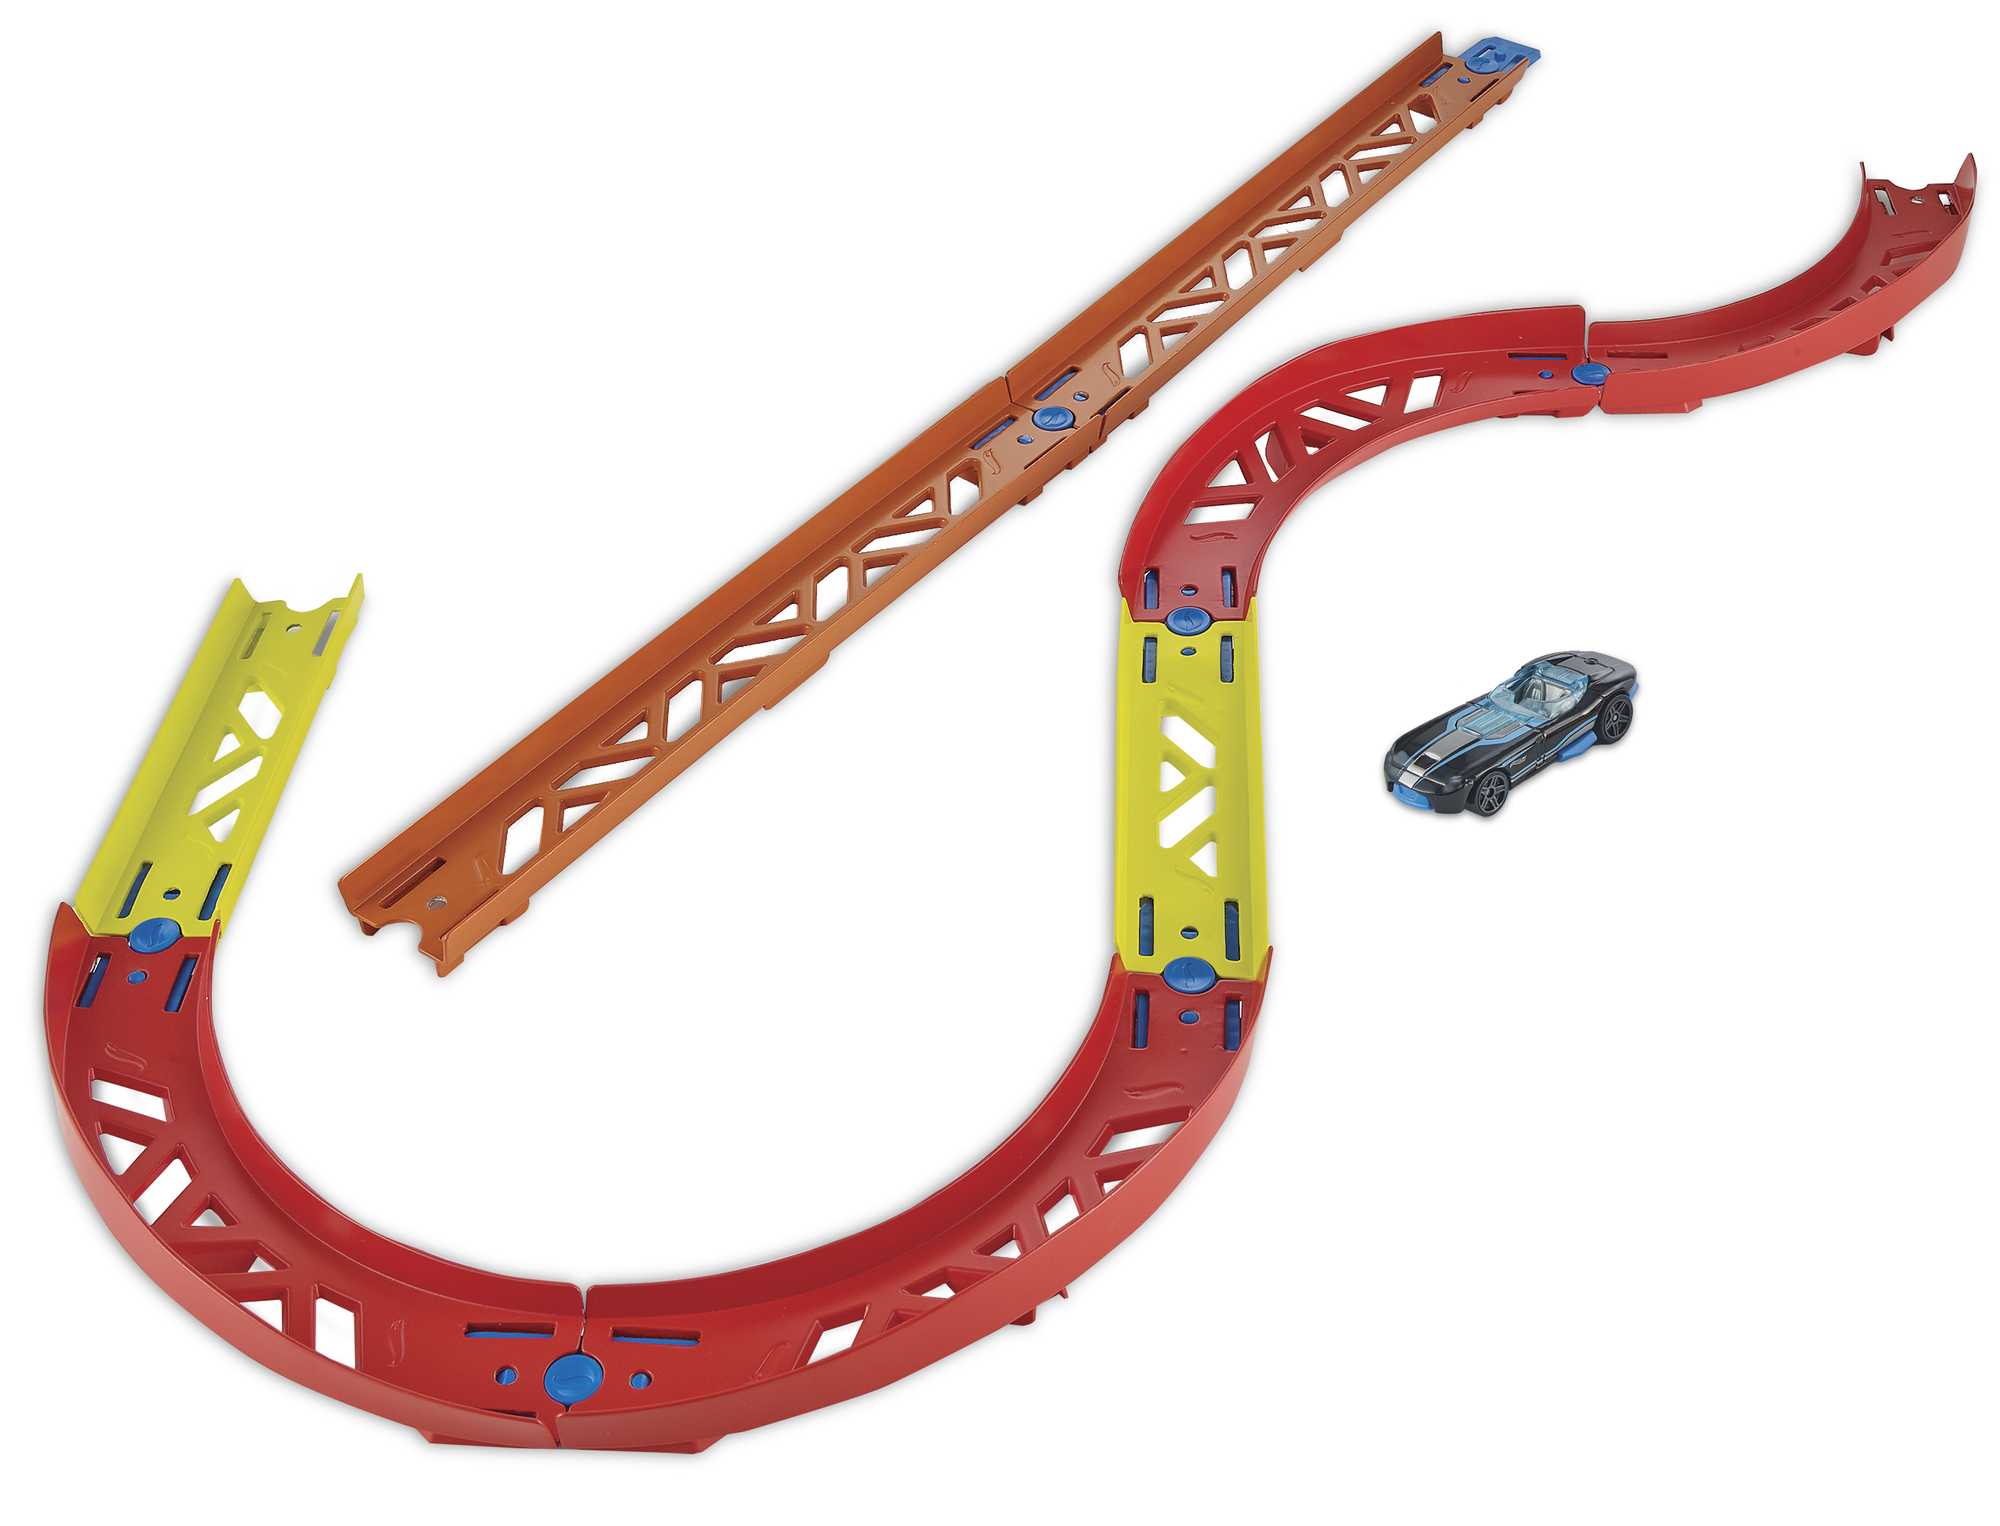  Hot Wheels Track Builder Straight Track Set, 37 Component Parts  & 1:64 Scale Toy Car : Toys & Games